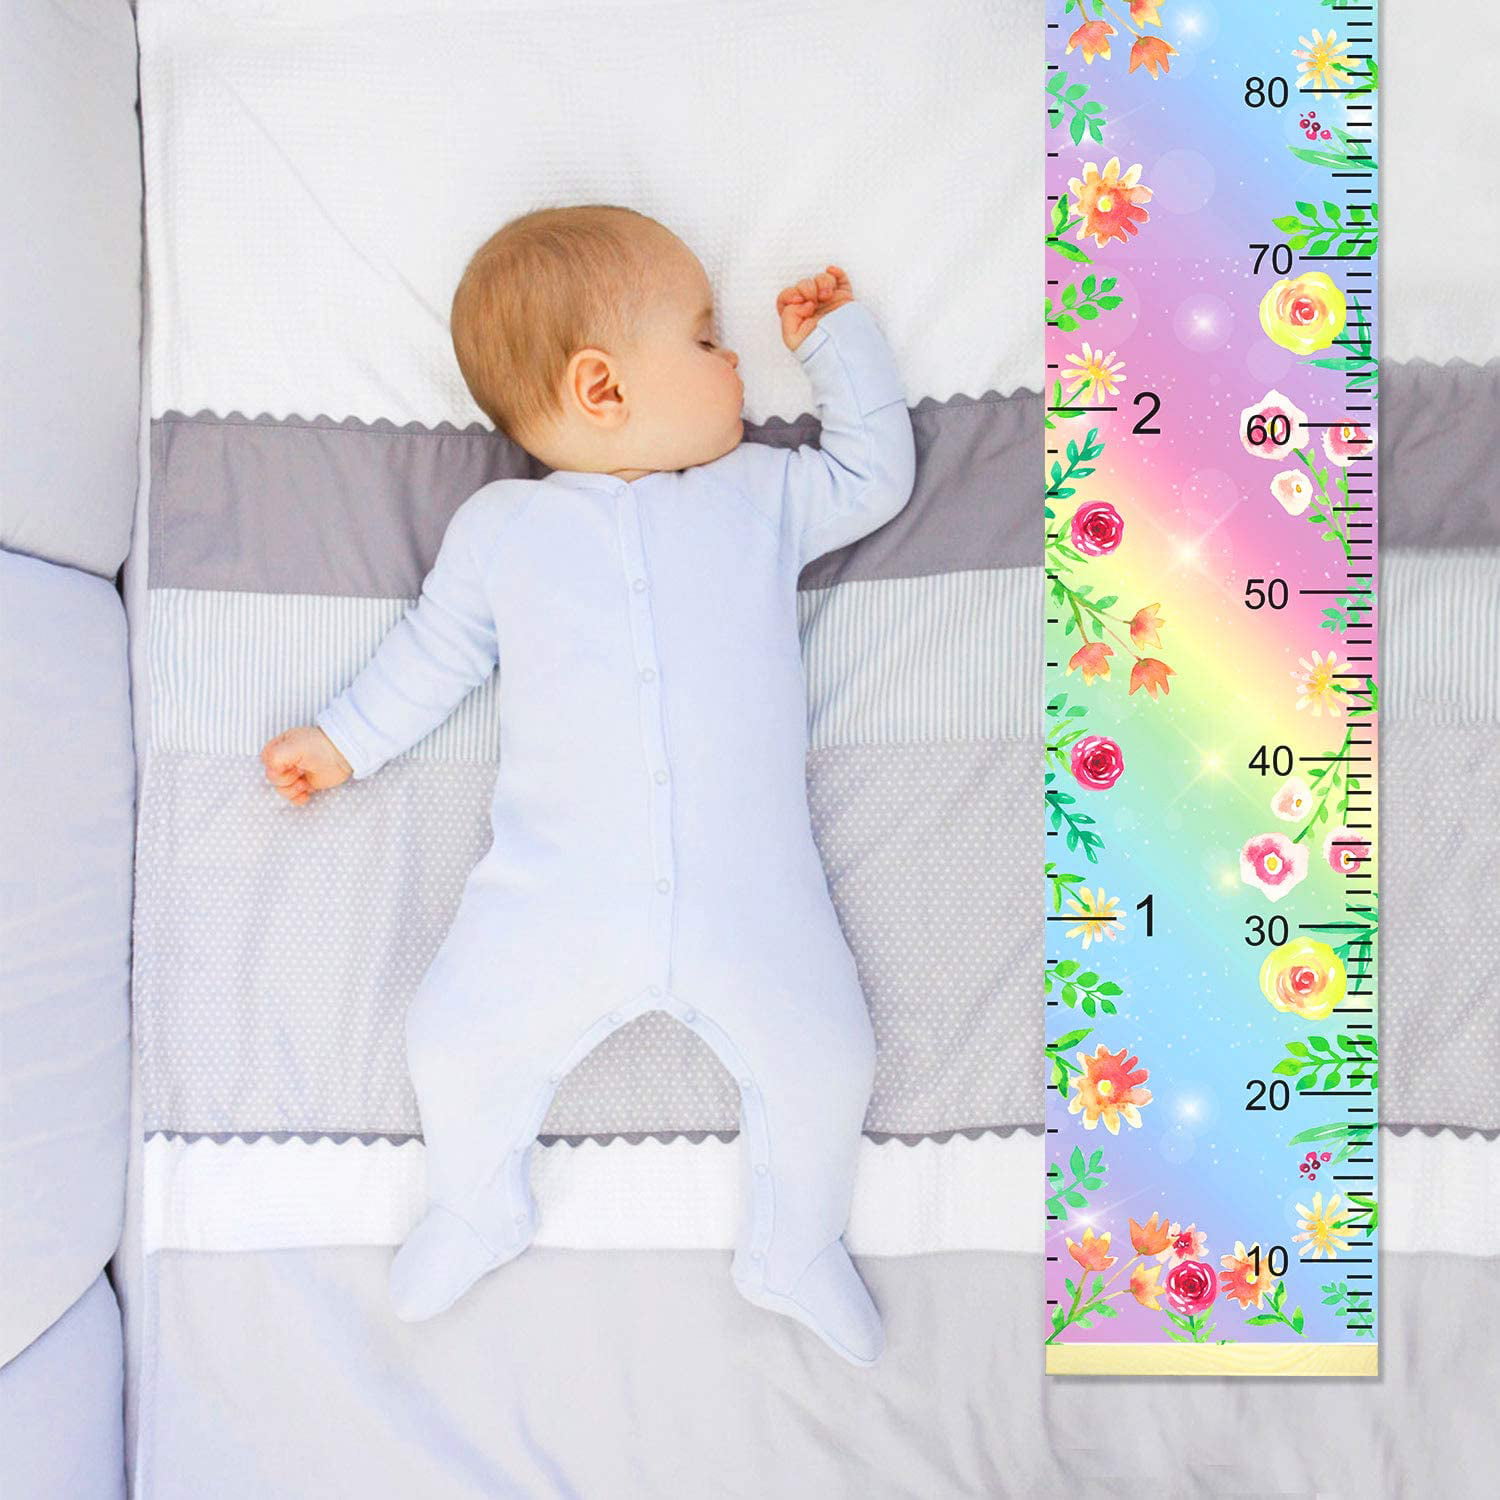 Foldable Kids Height Chart Wall Decor Nursery Growth Measurement Ruler Removable 